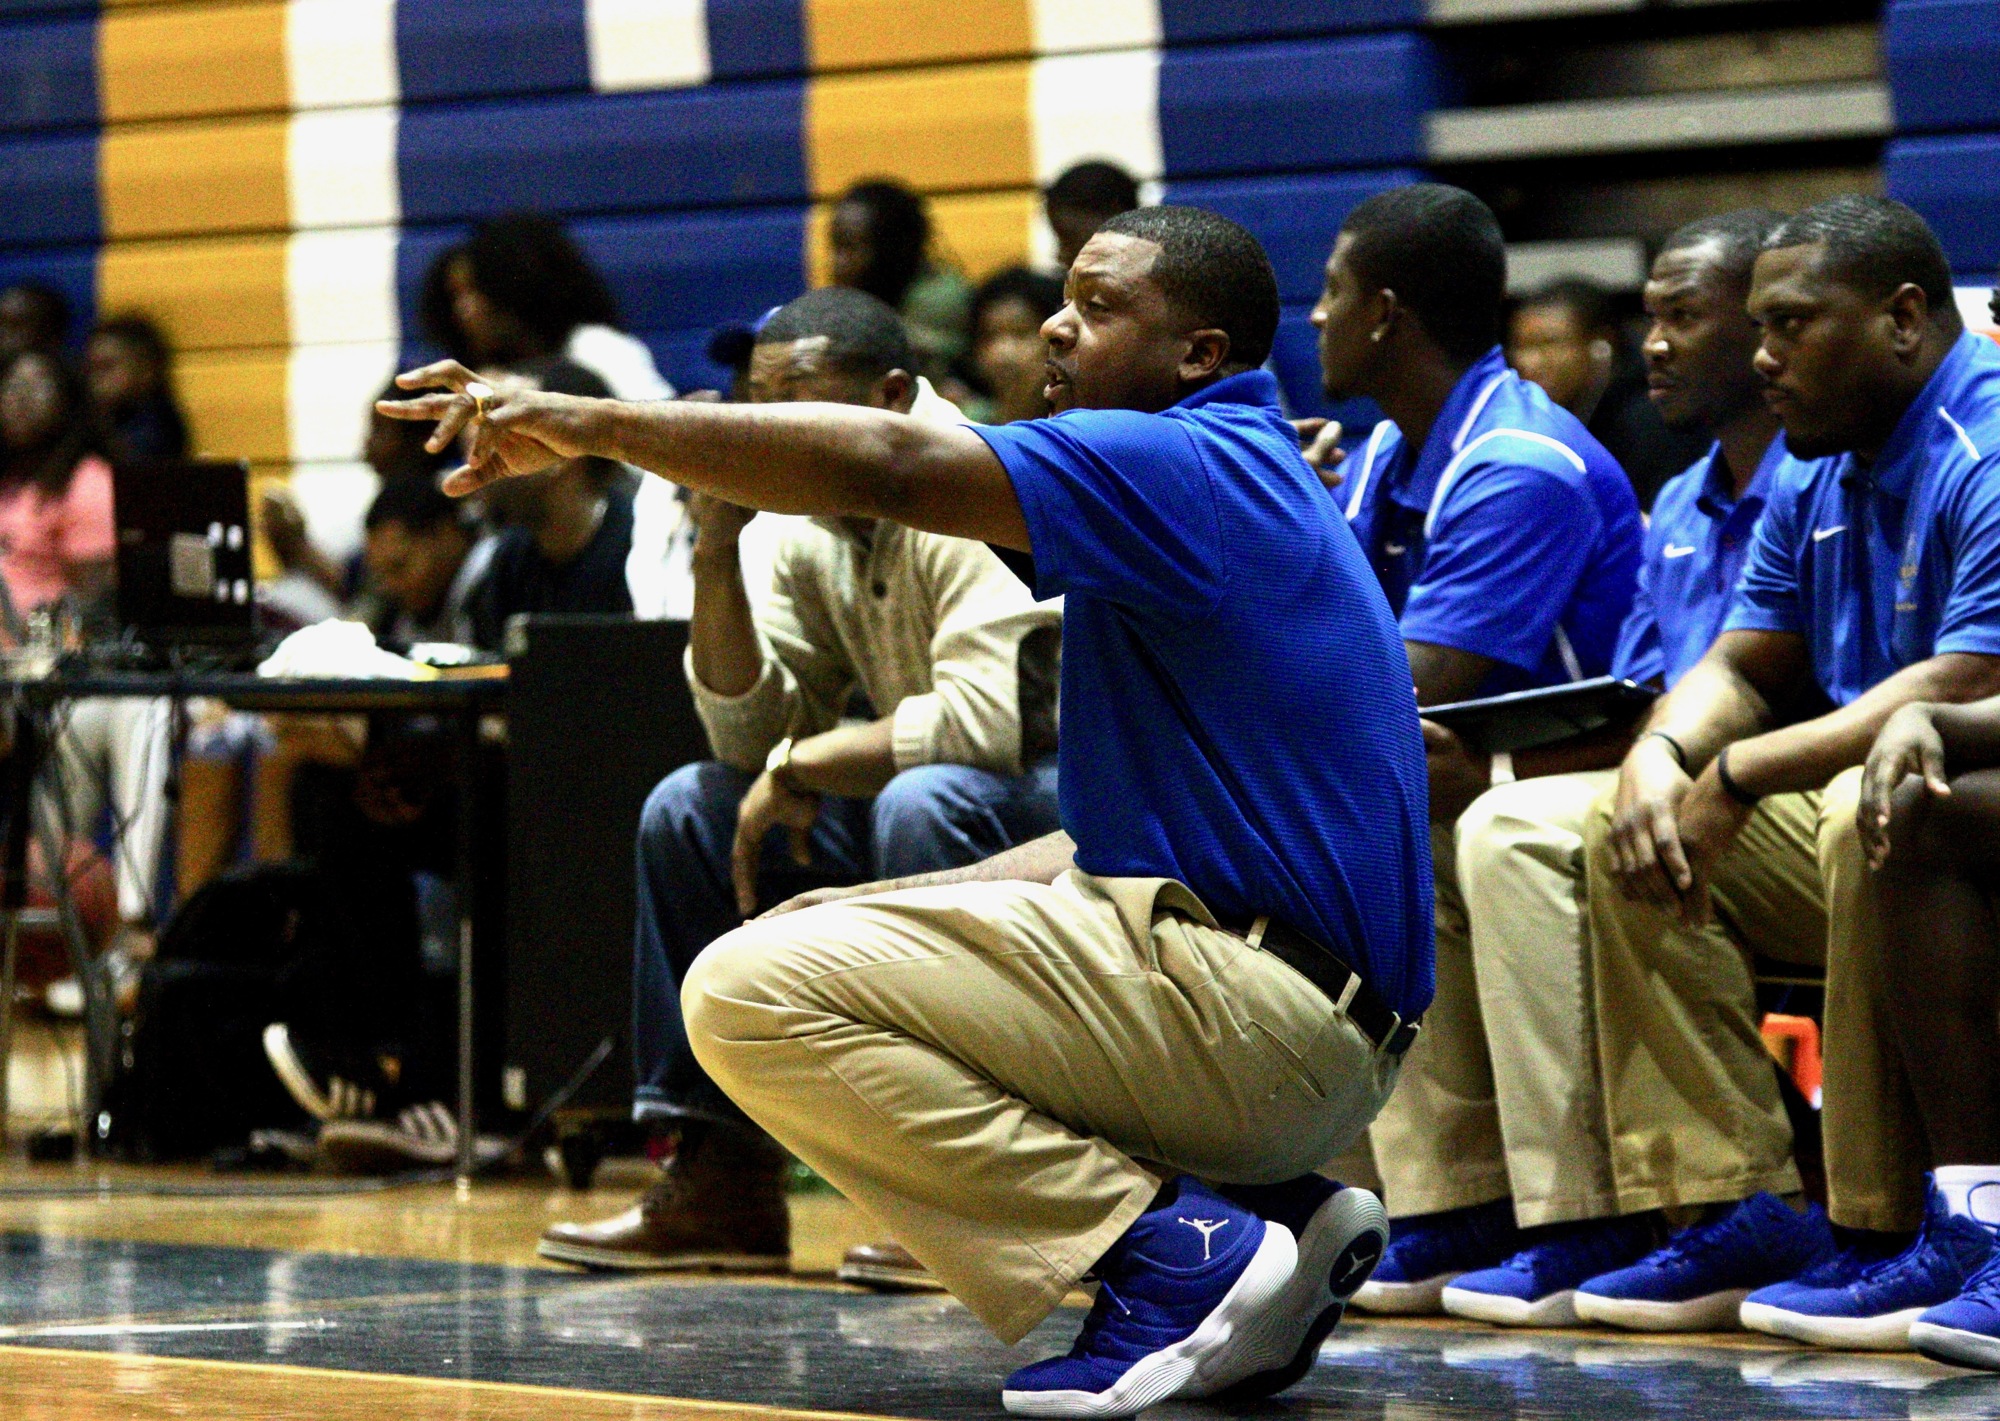 Mainland coach Joe Giddens shouts instructions to his team from the bench. Photo by Ray Boone